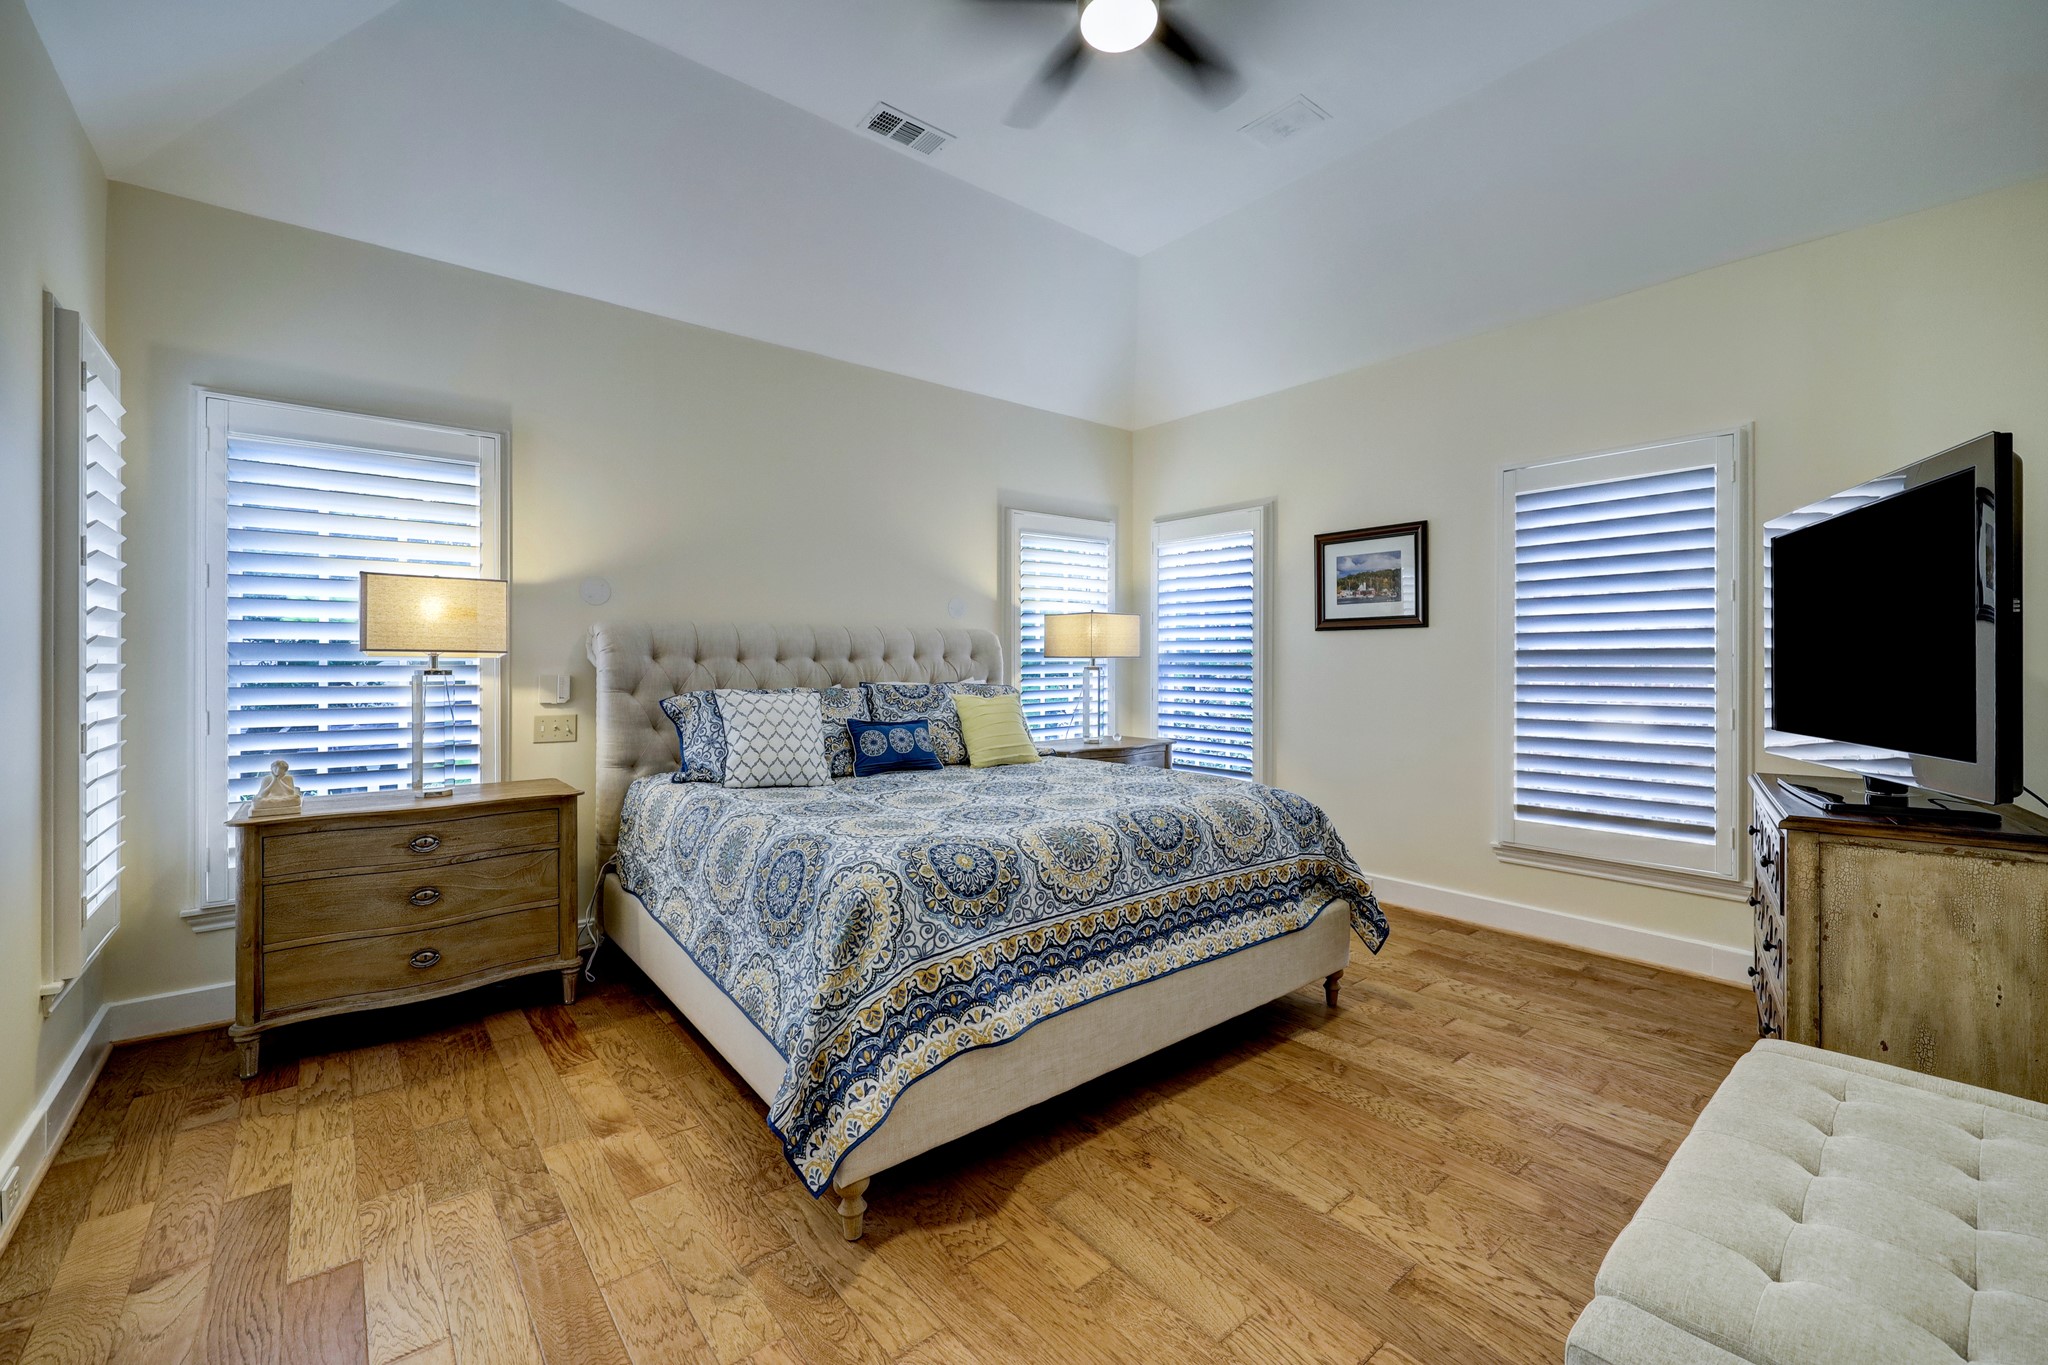 The primary bedroom with hardwood floors and tons of ambient light. Custom shutters.